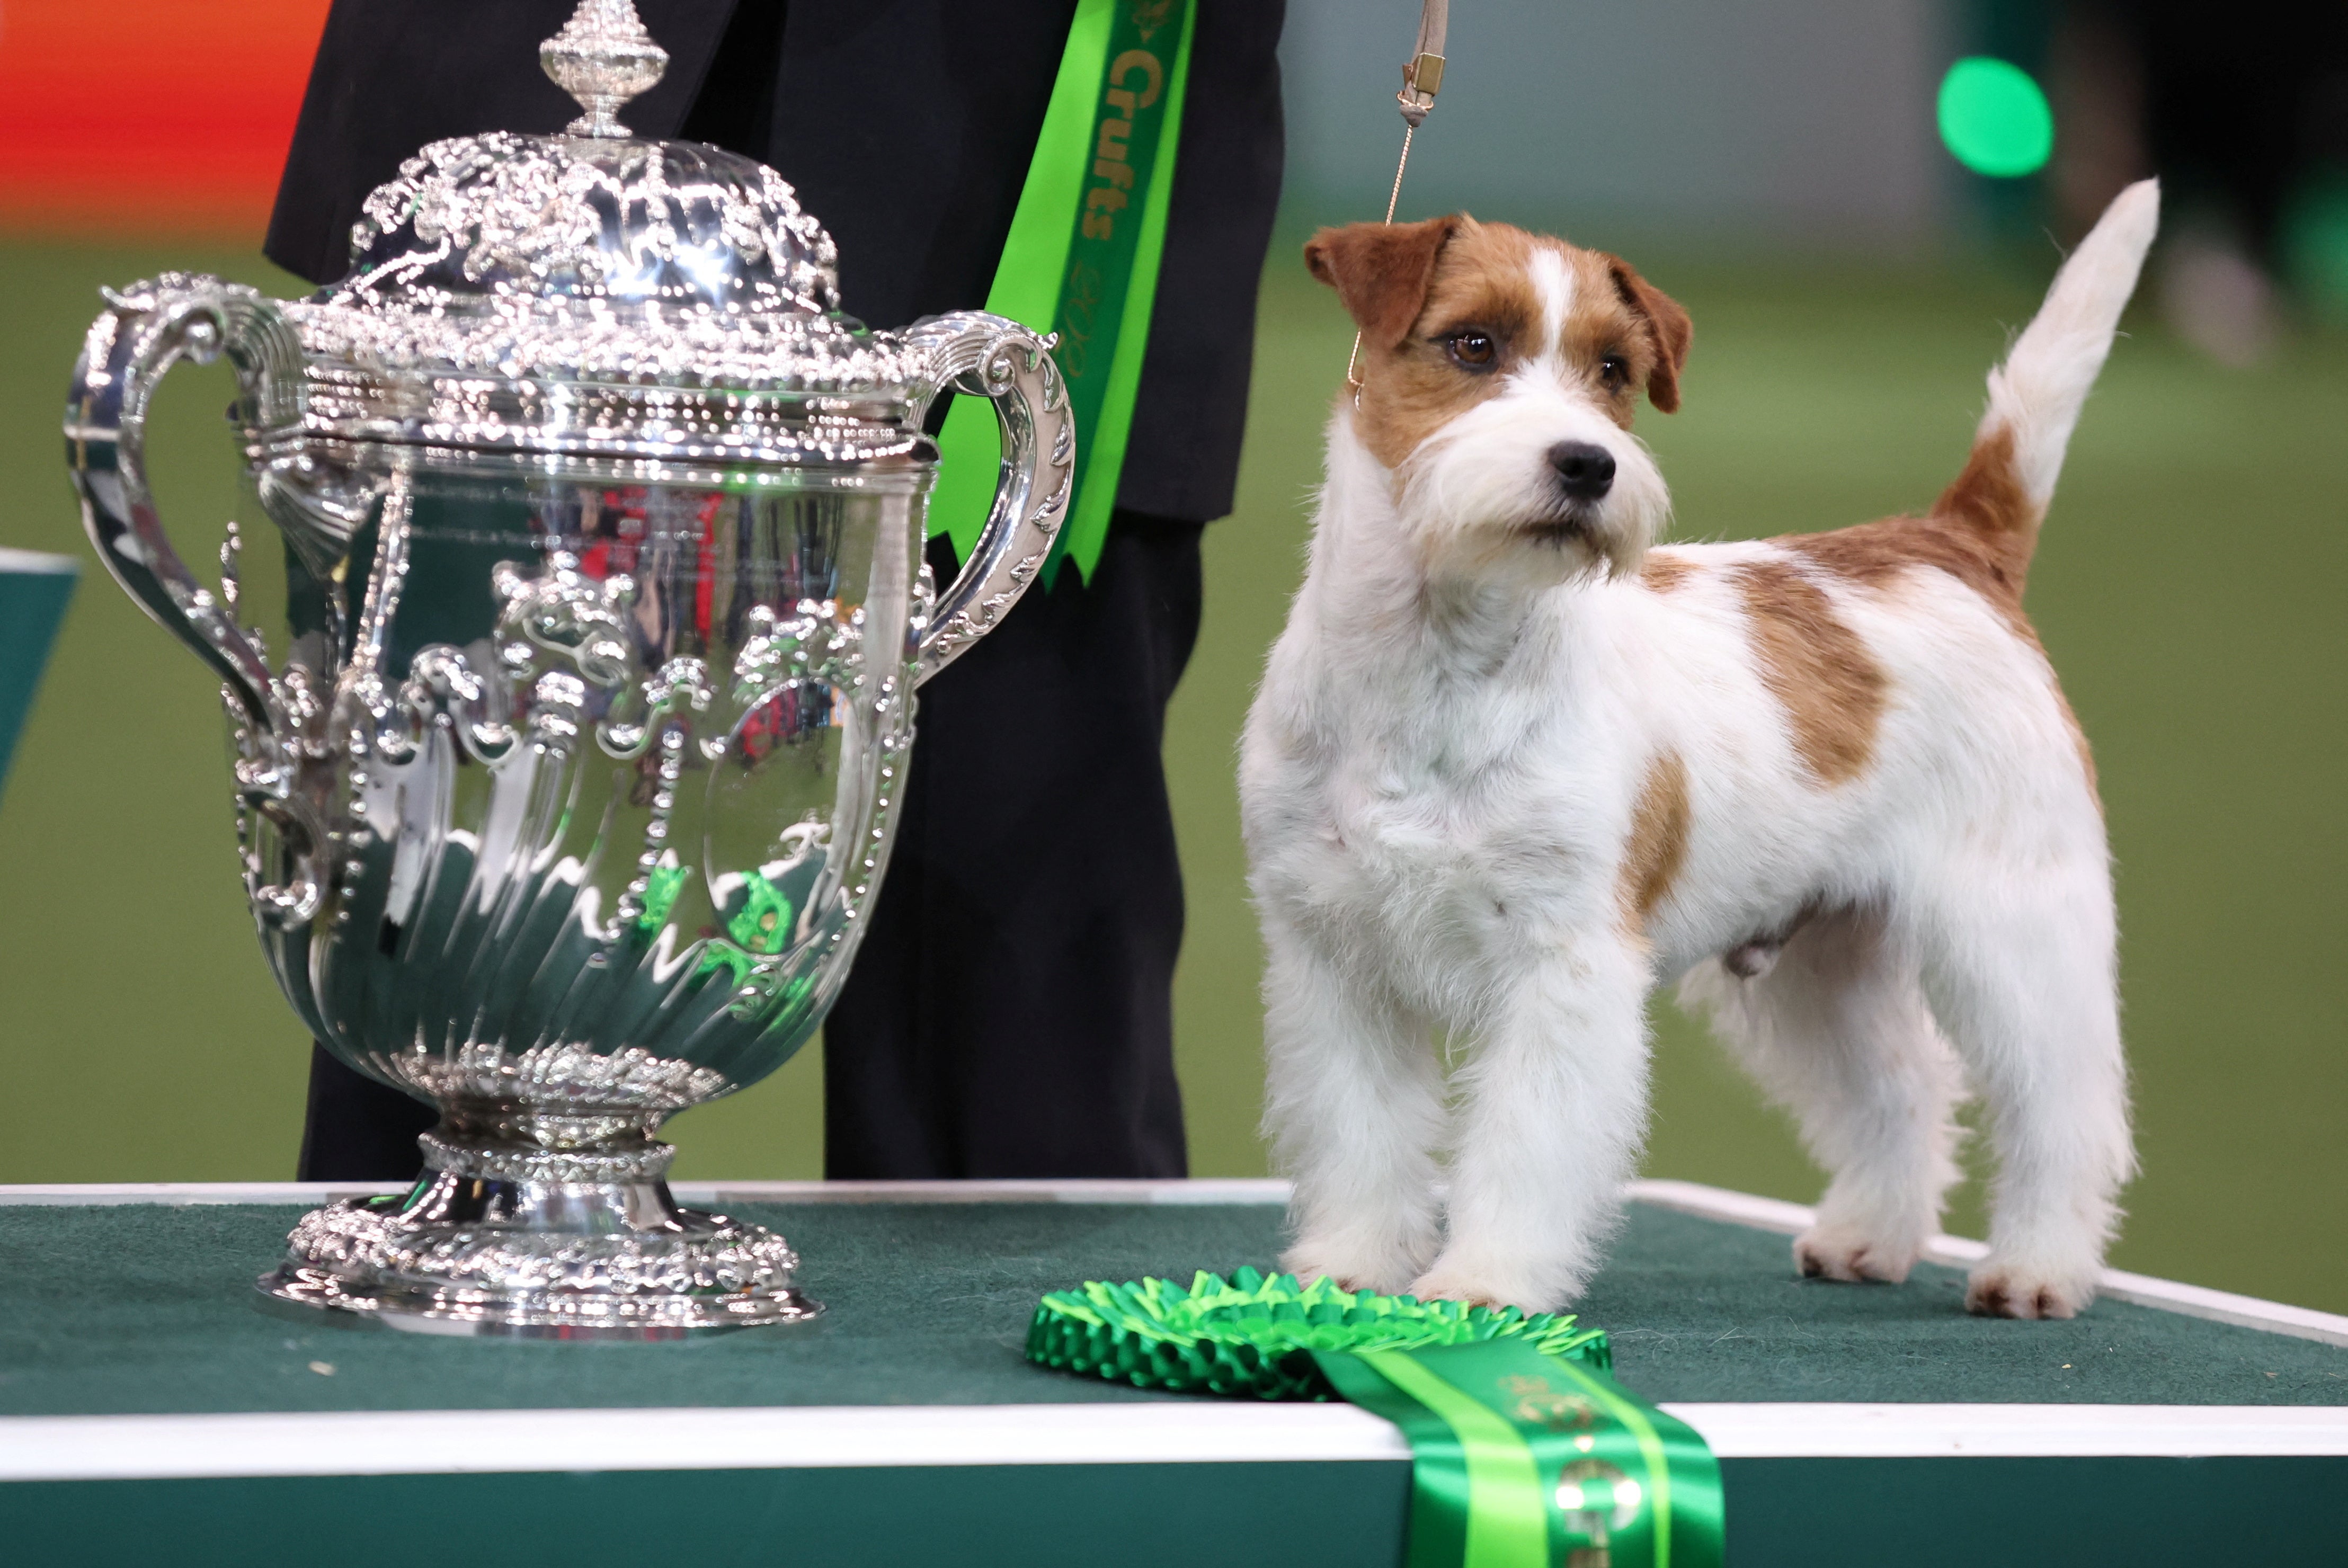 Zen, a Jack Russell Terrier from Japan, wins the second place on the final day of the Crufts Dog Show